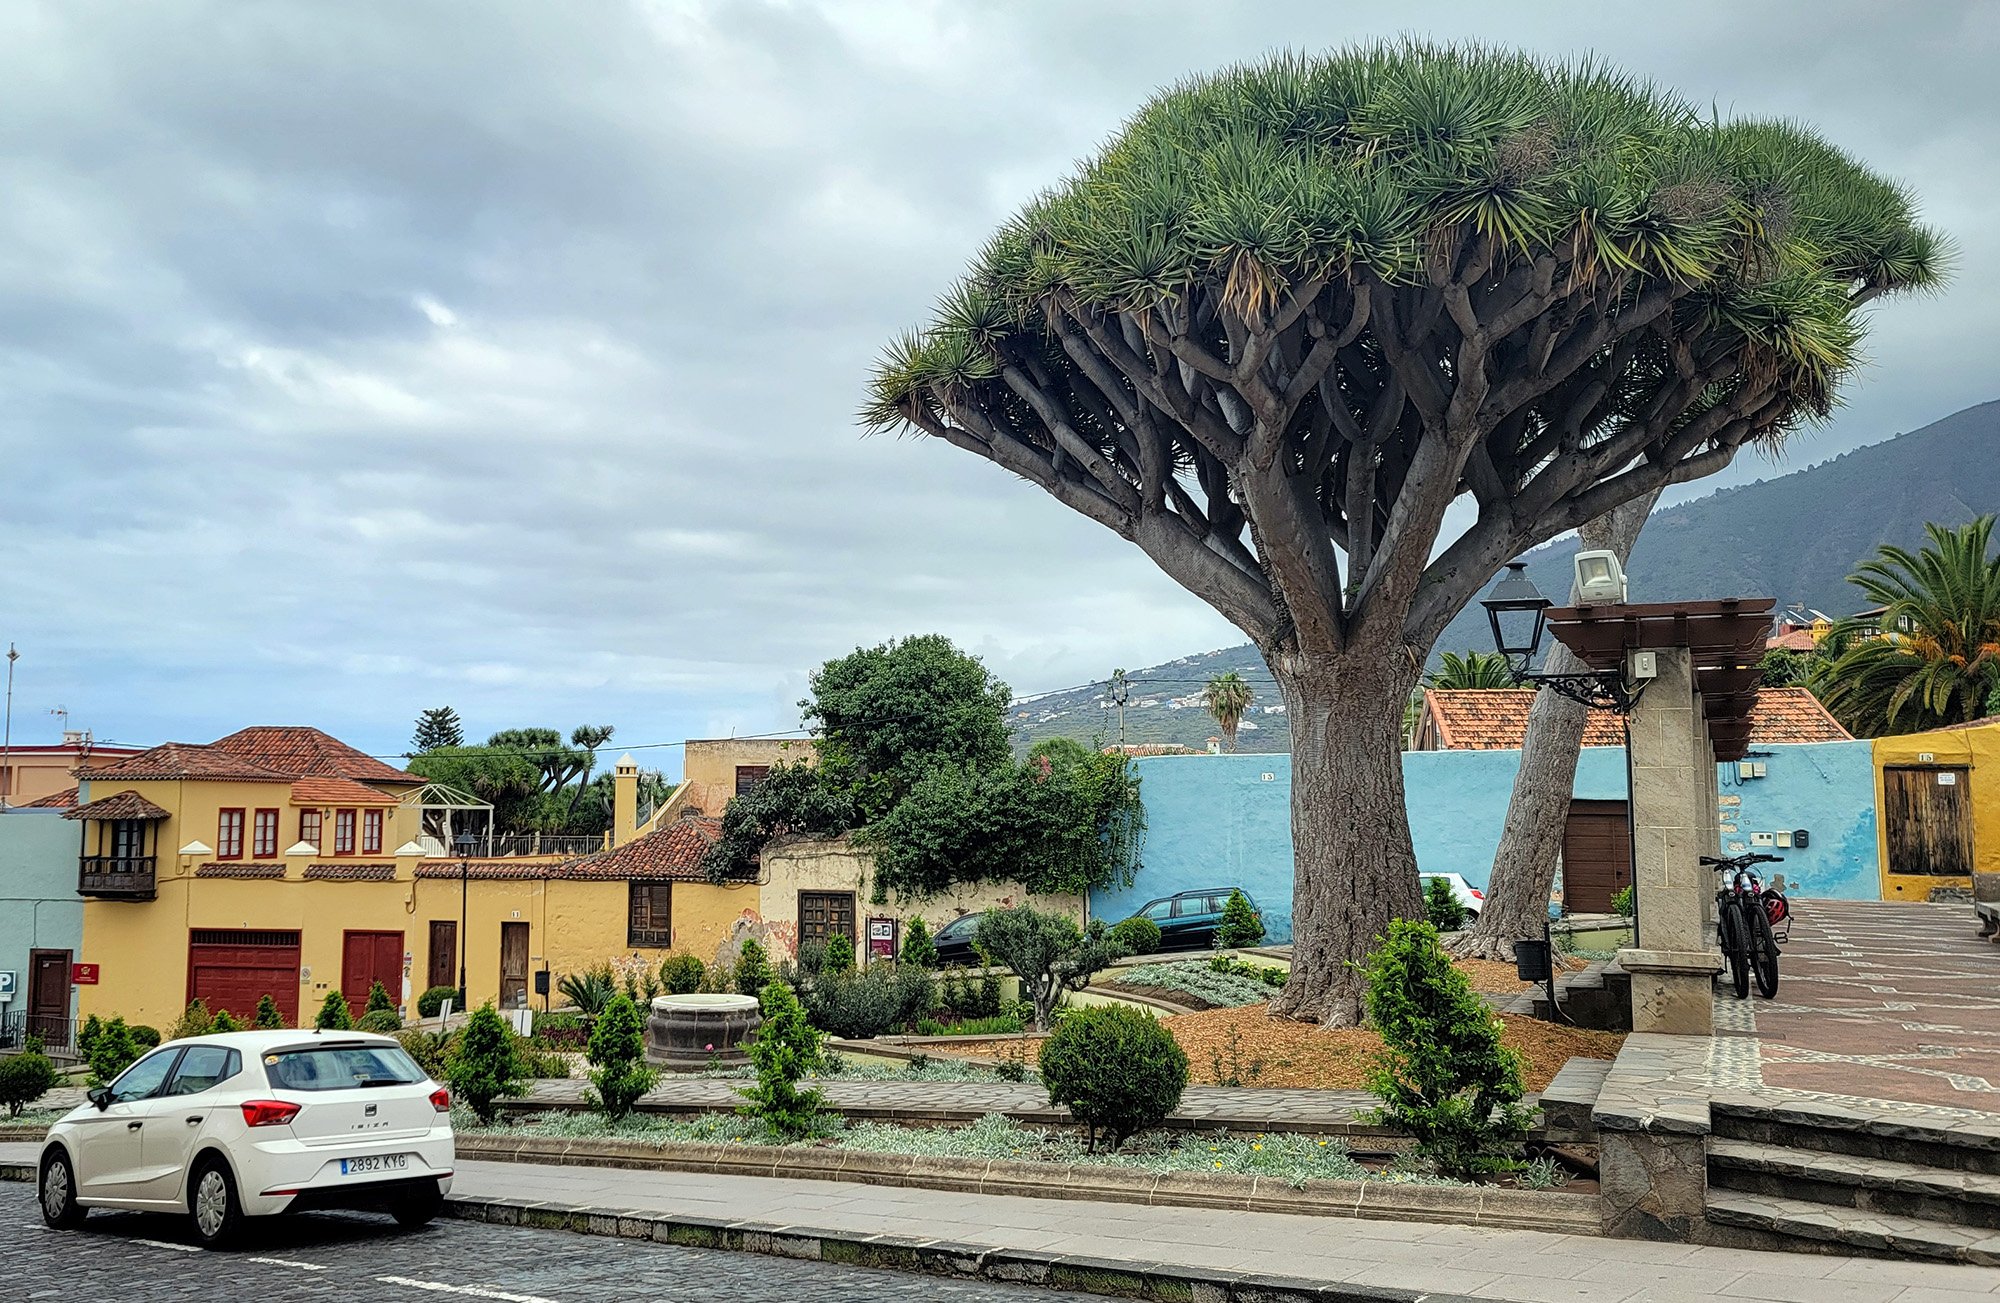 A really nice Dragon Tree ( Dracaena draco ) sitting in a town square. These things are so cool.